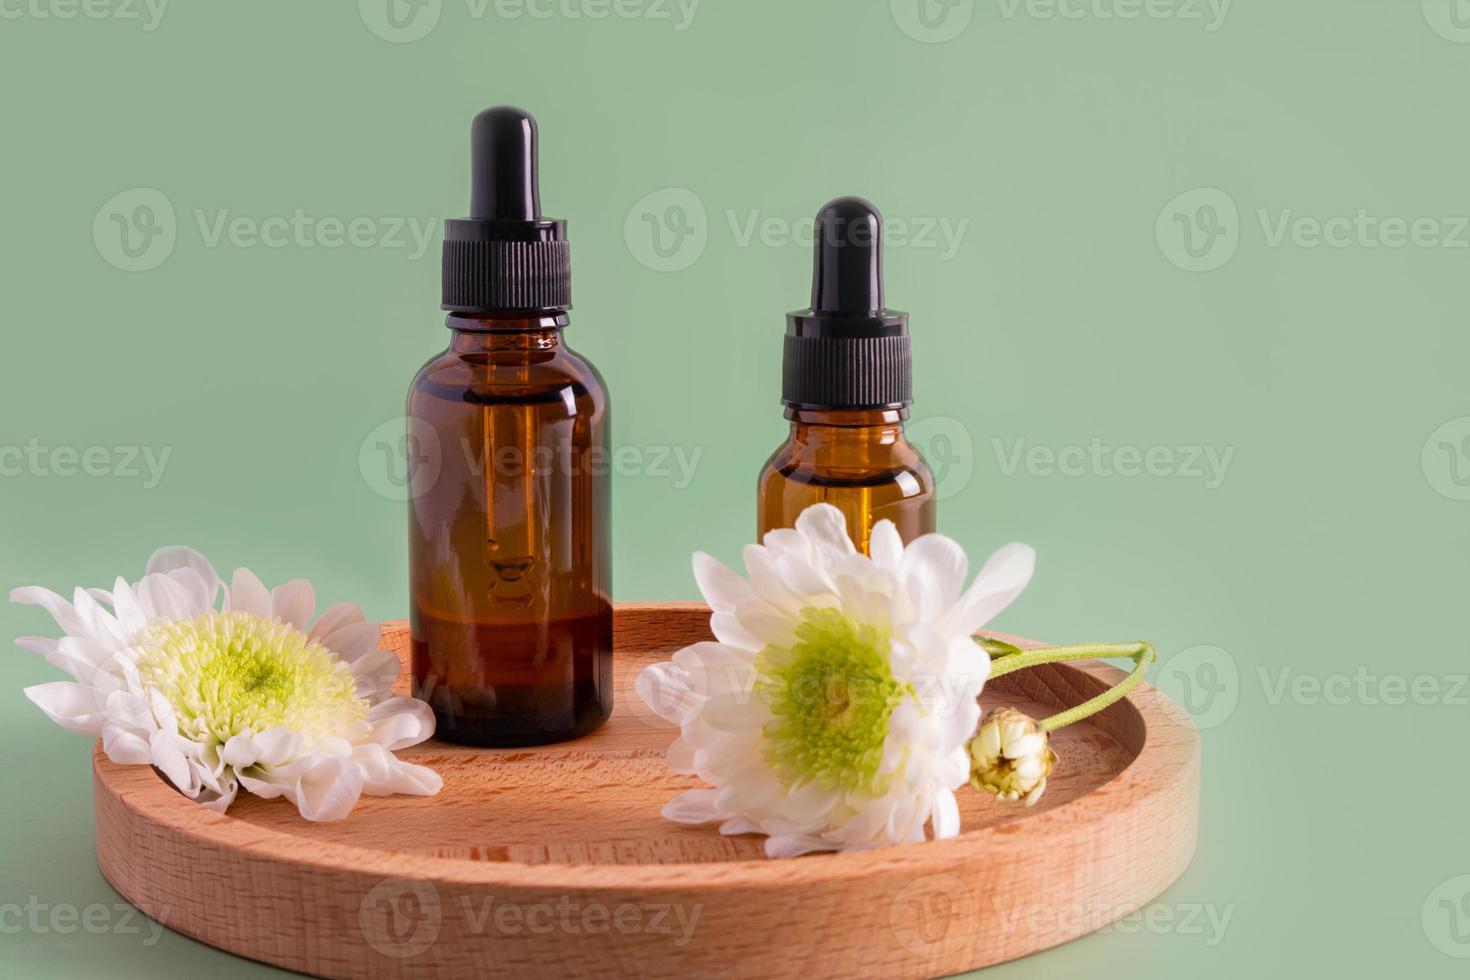 two bottles with a dropper with a natural remedy or serum for organic skin care of the face stand on a wooden plate. front view. green background. photo